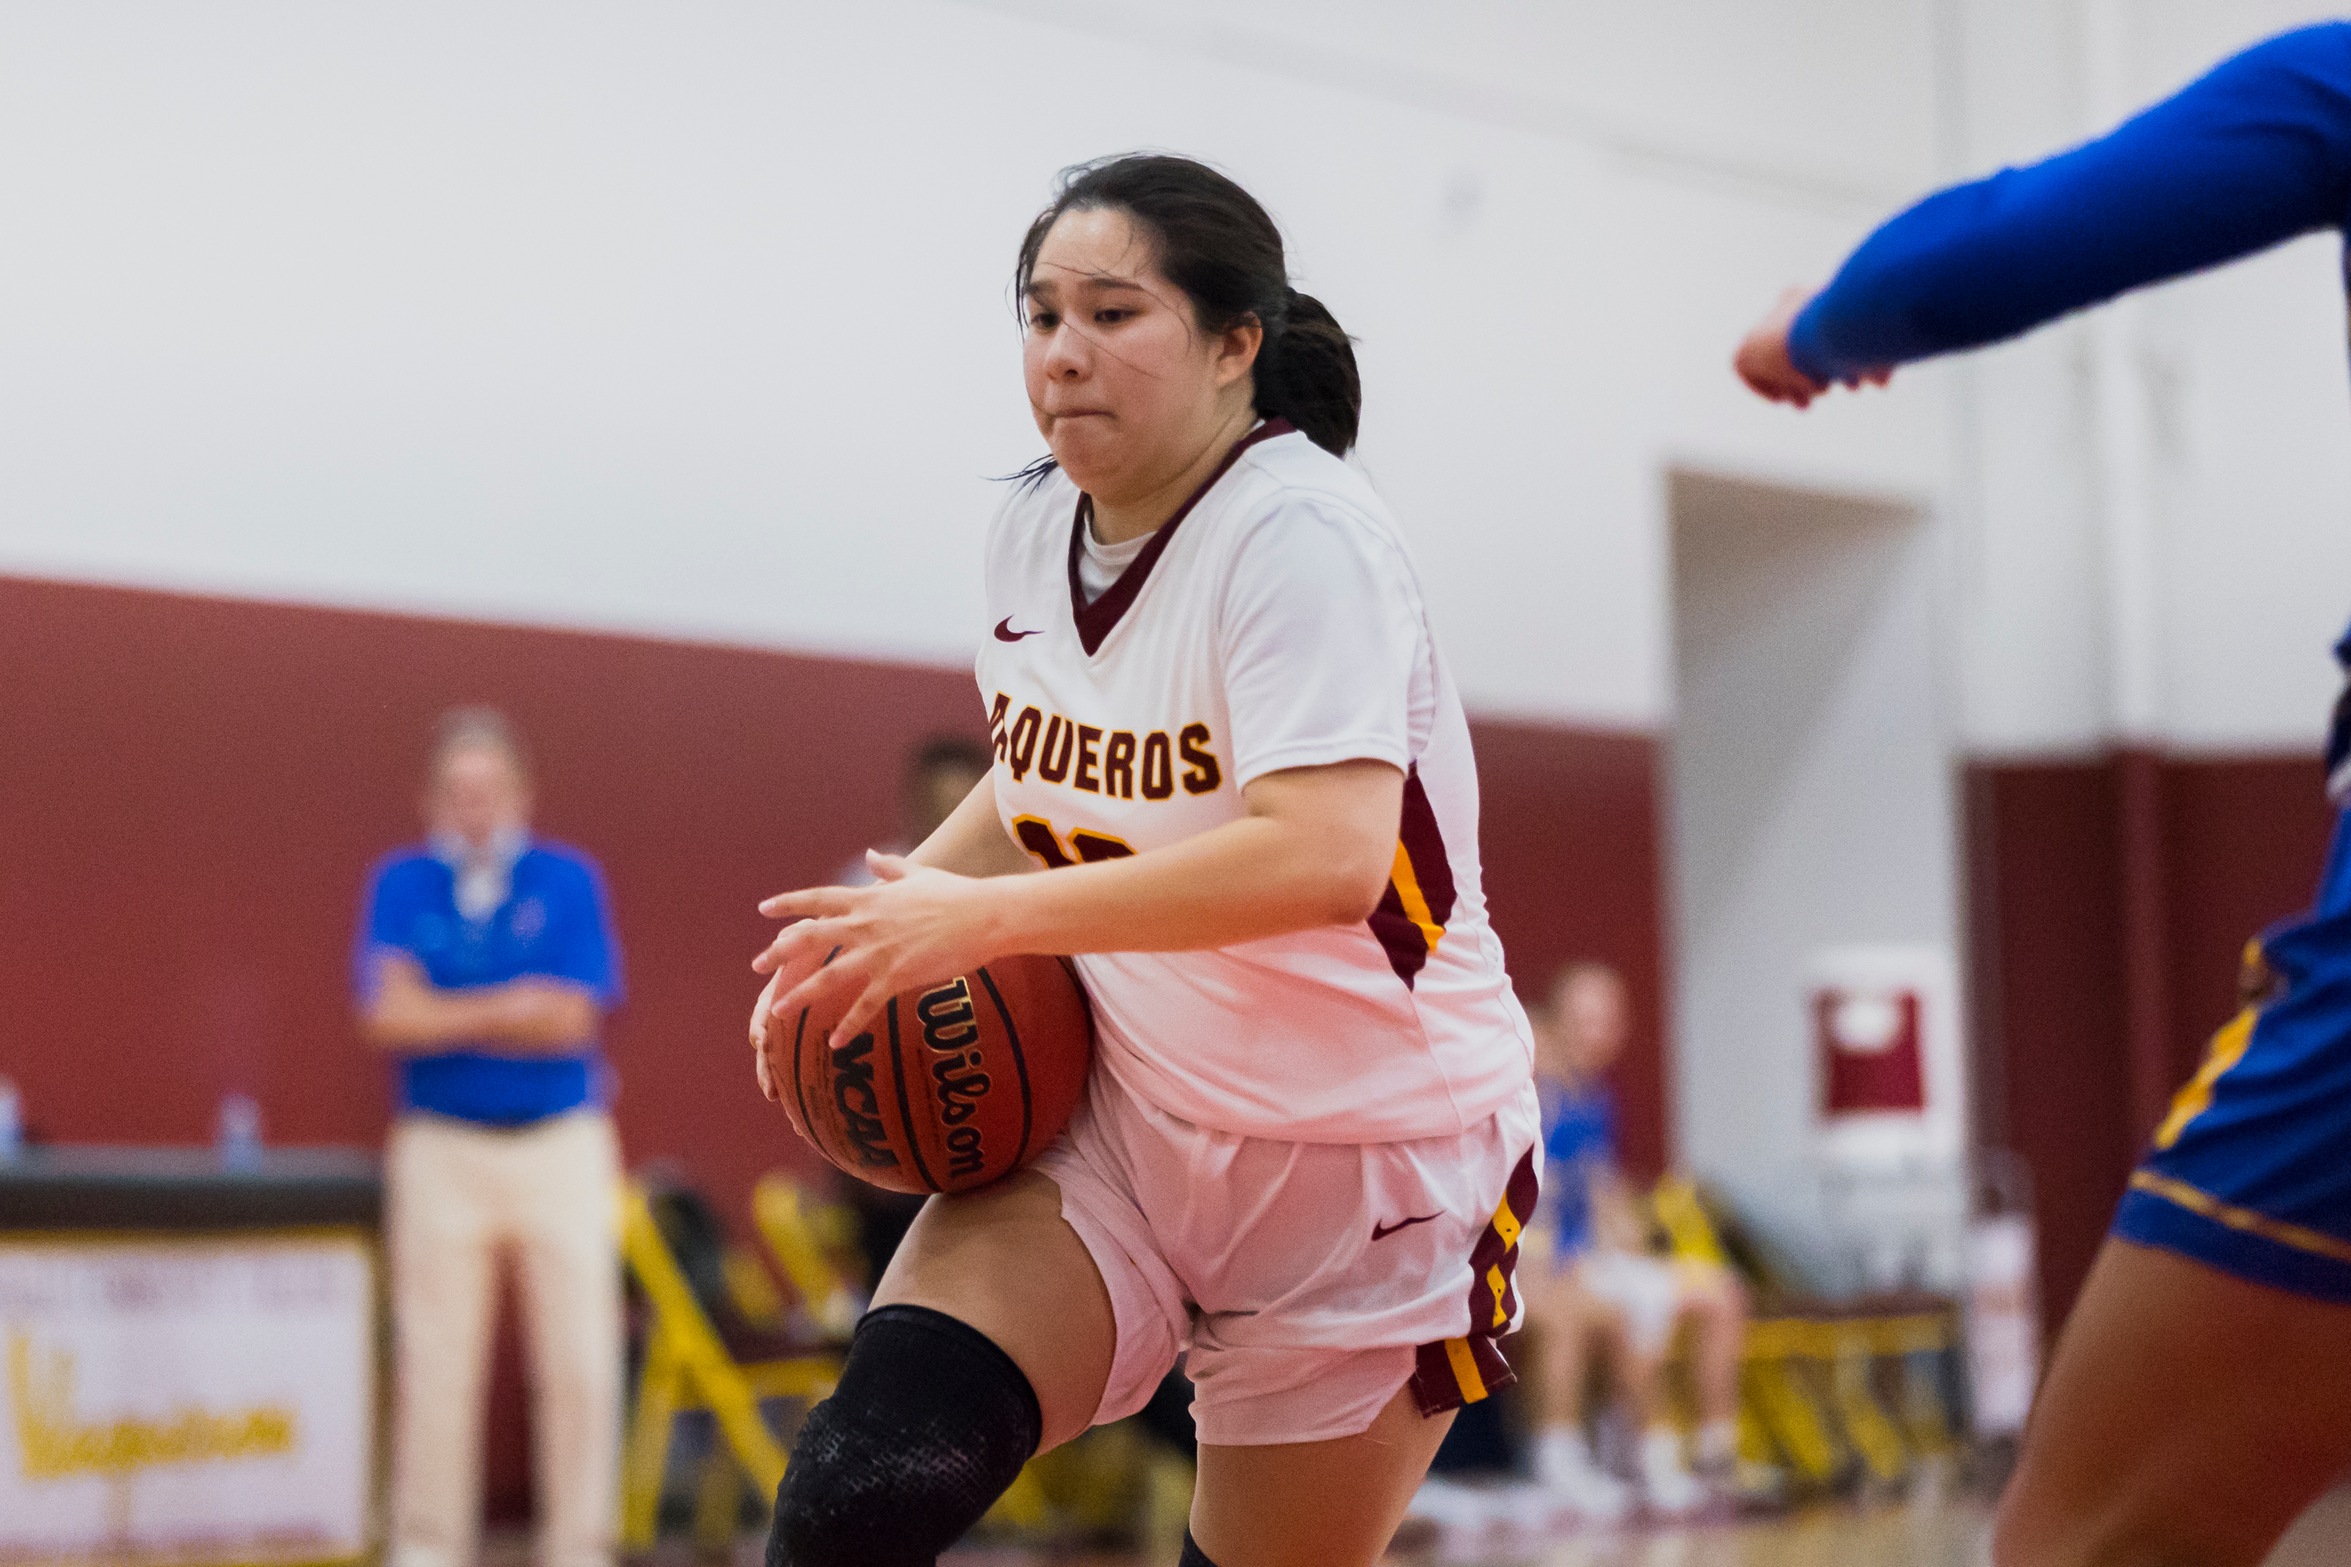 GCC Women's Basketball wins ninth straight game, 48-43 over Antelope Valley, Feb. 12 to clinch a tie for WSC South Title